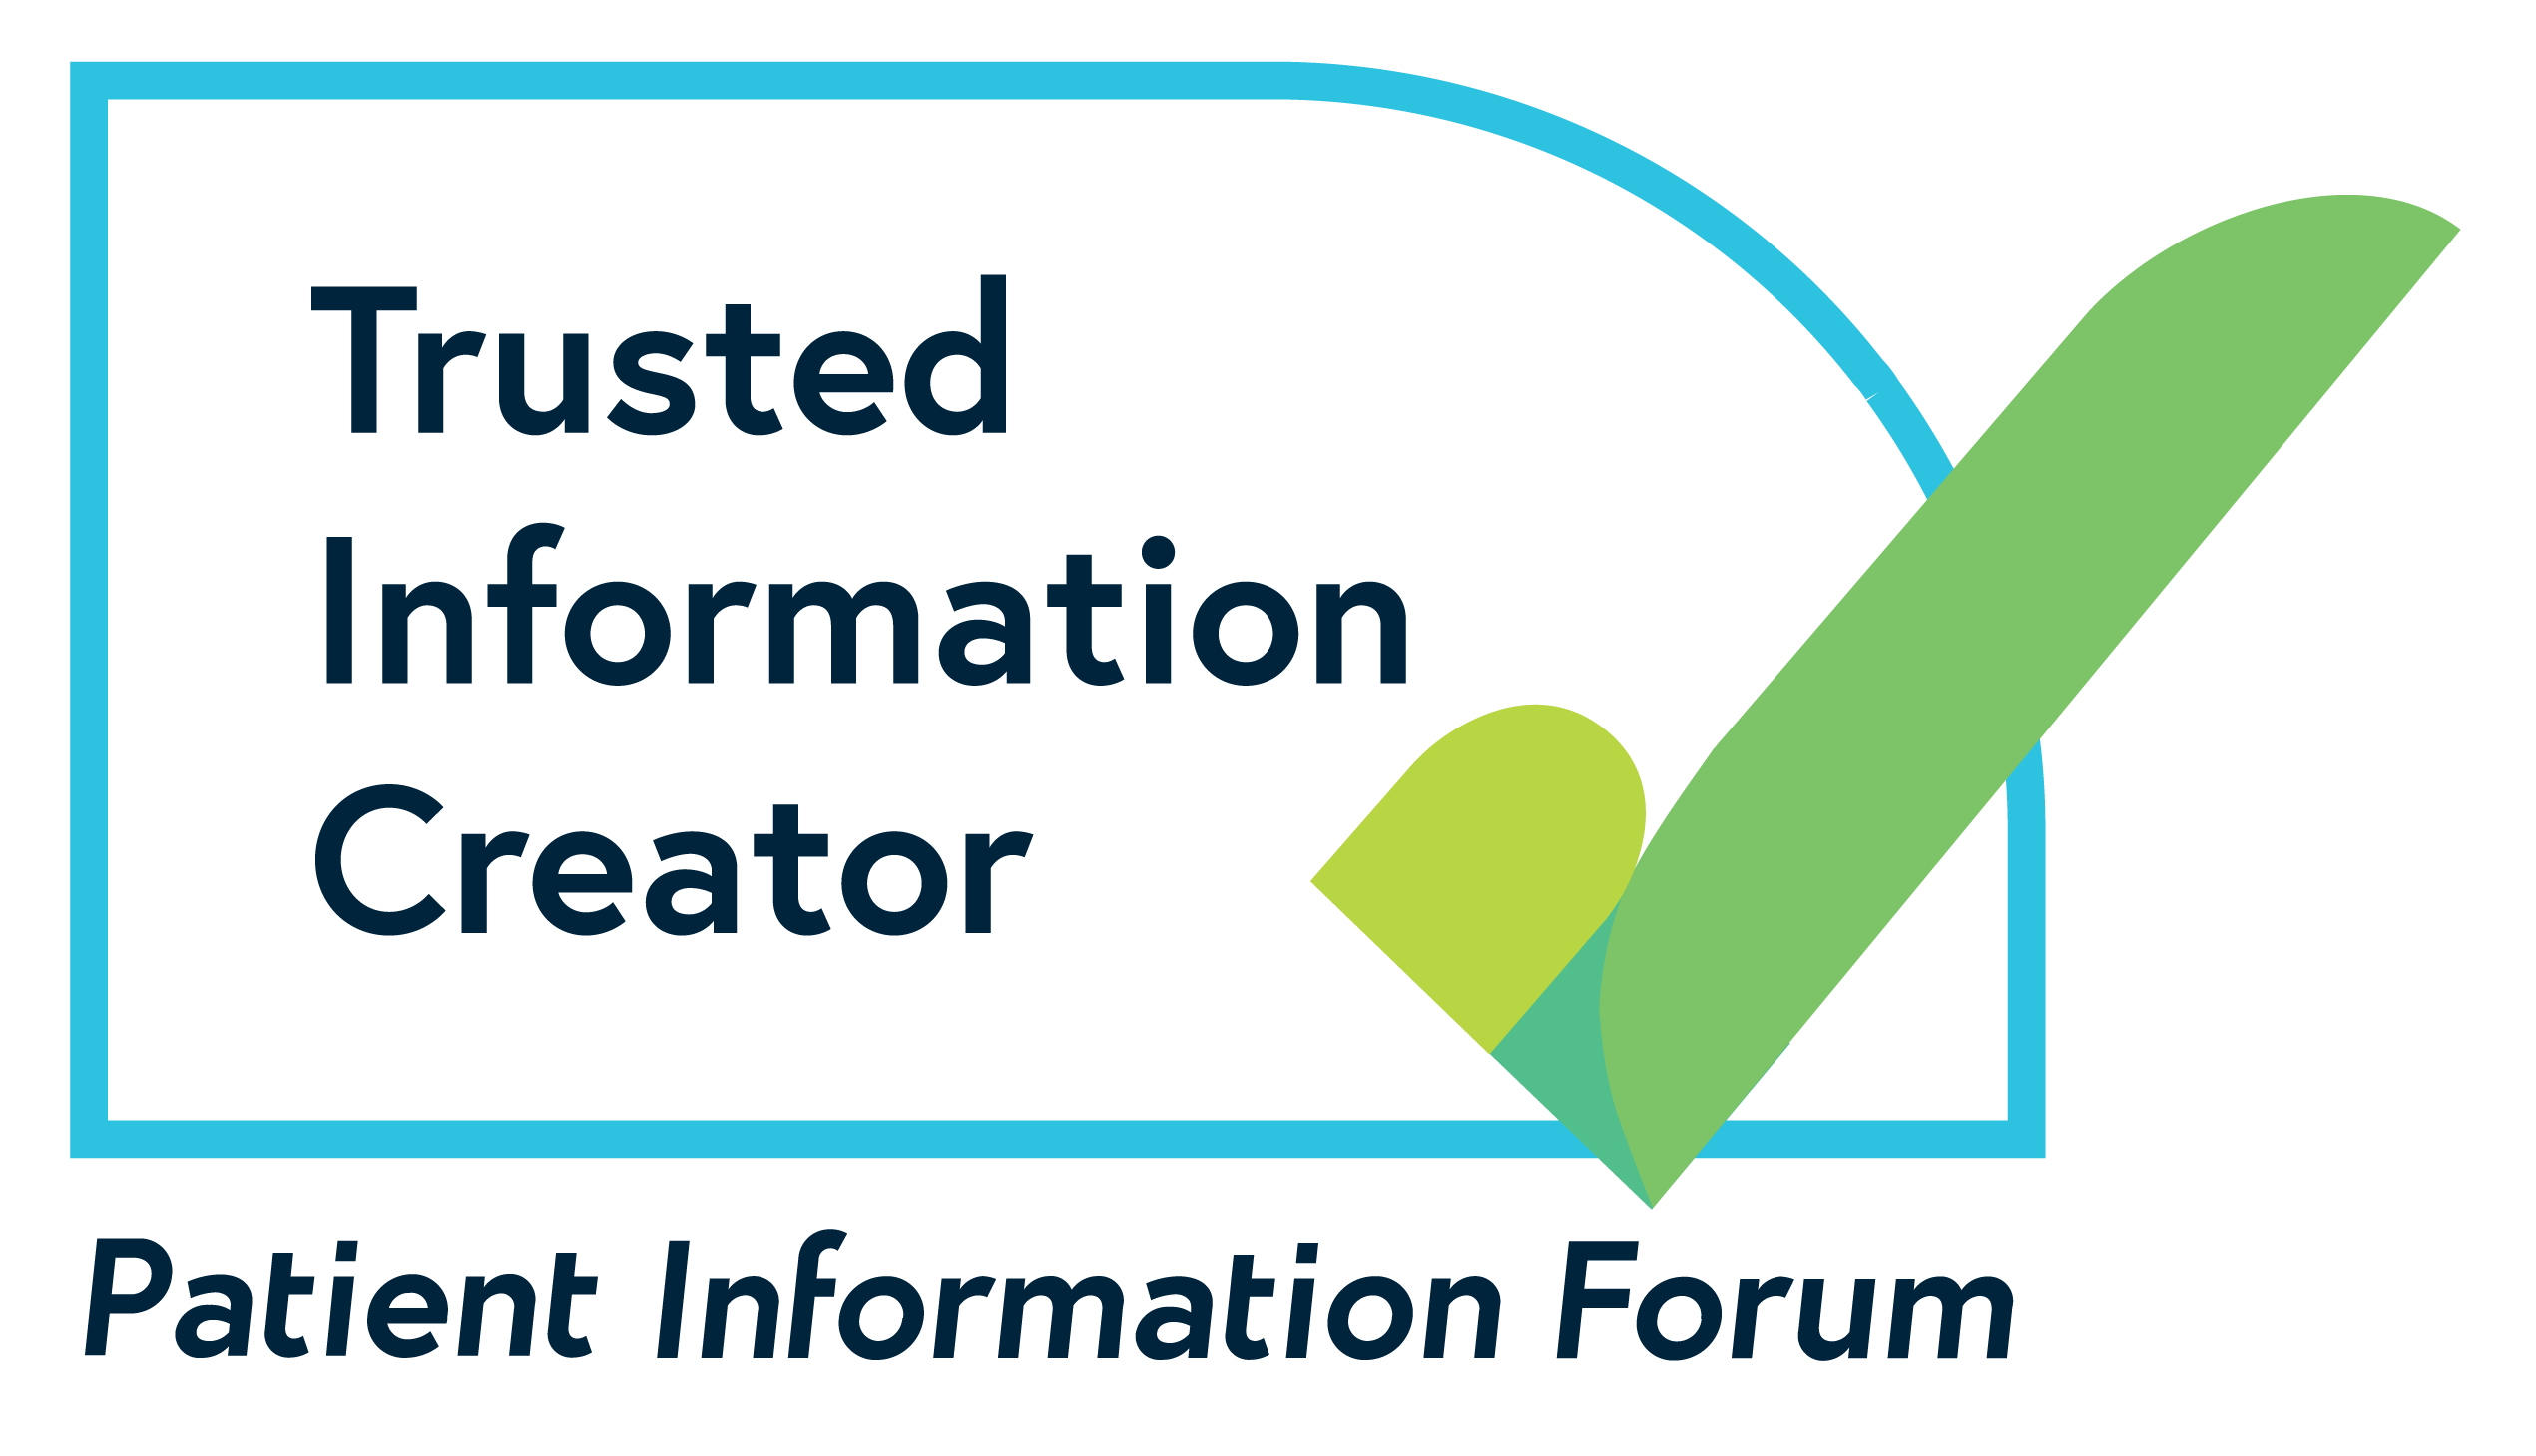 Trusted infomation creator - patient infomation forum